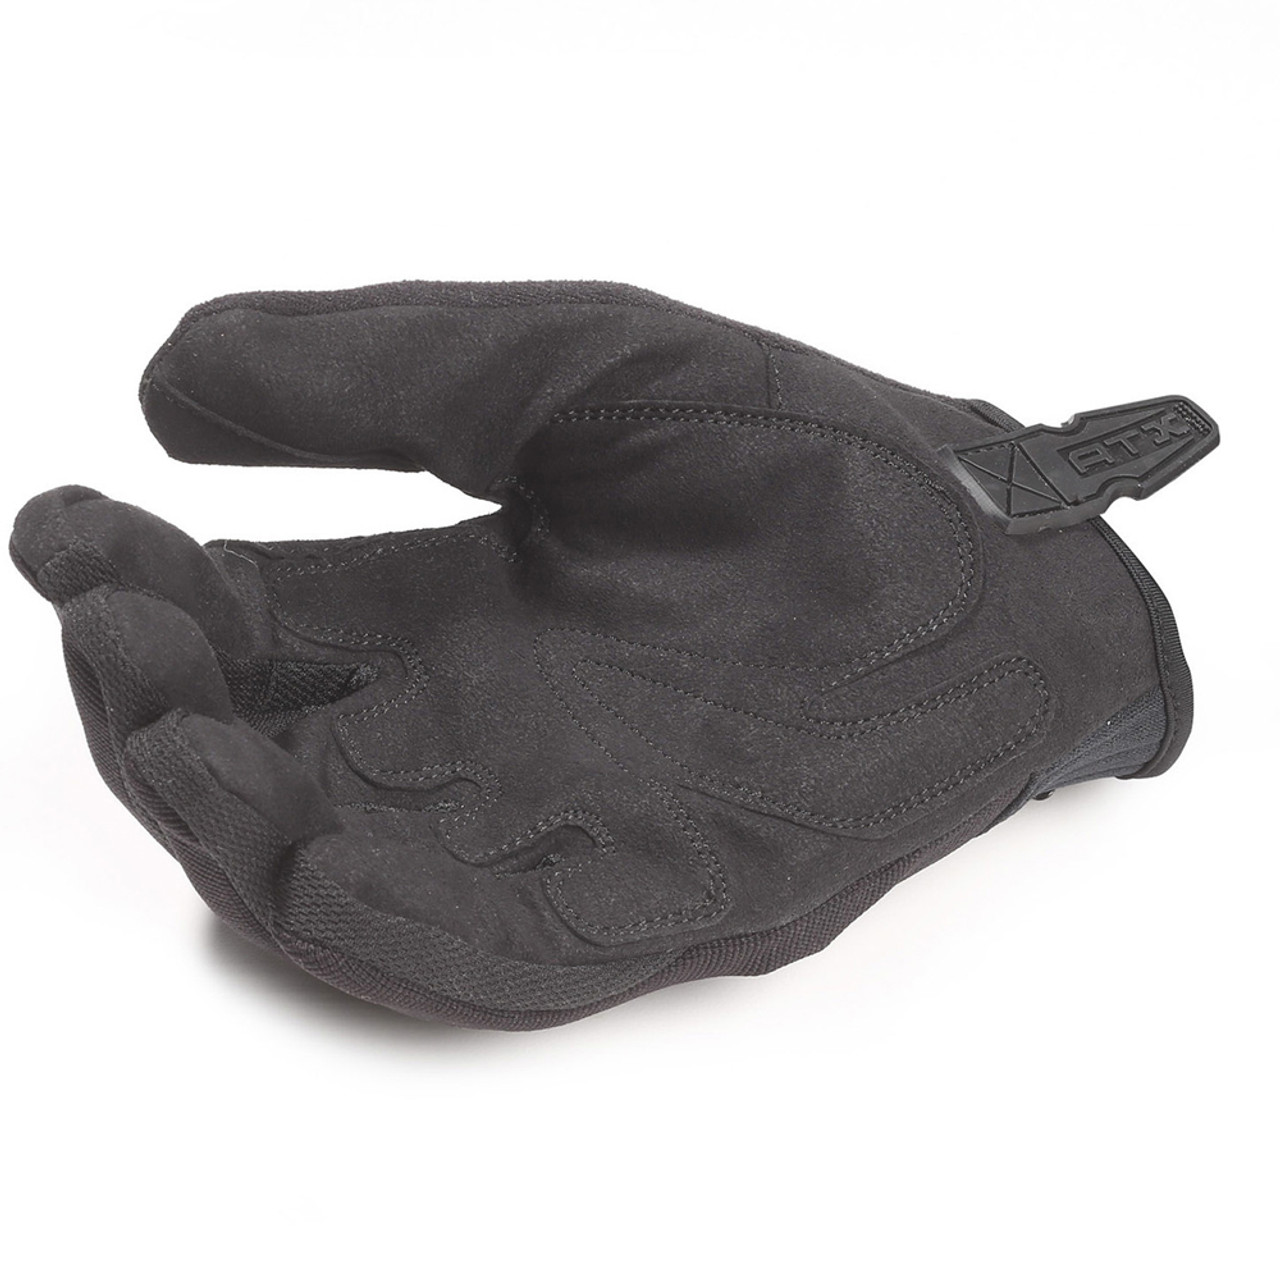 53264 MECHANICAL TACTICAL GLOVES